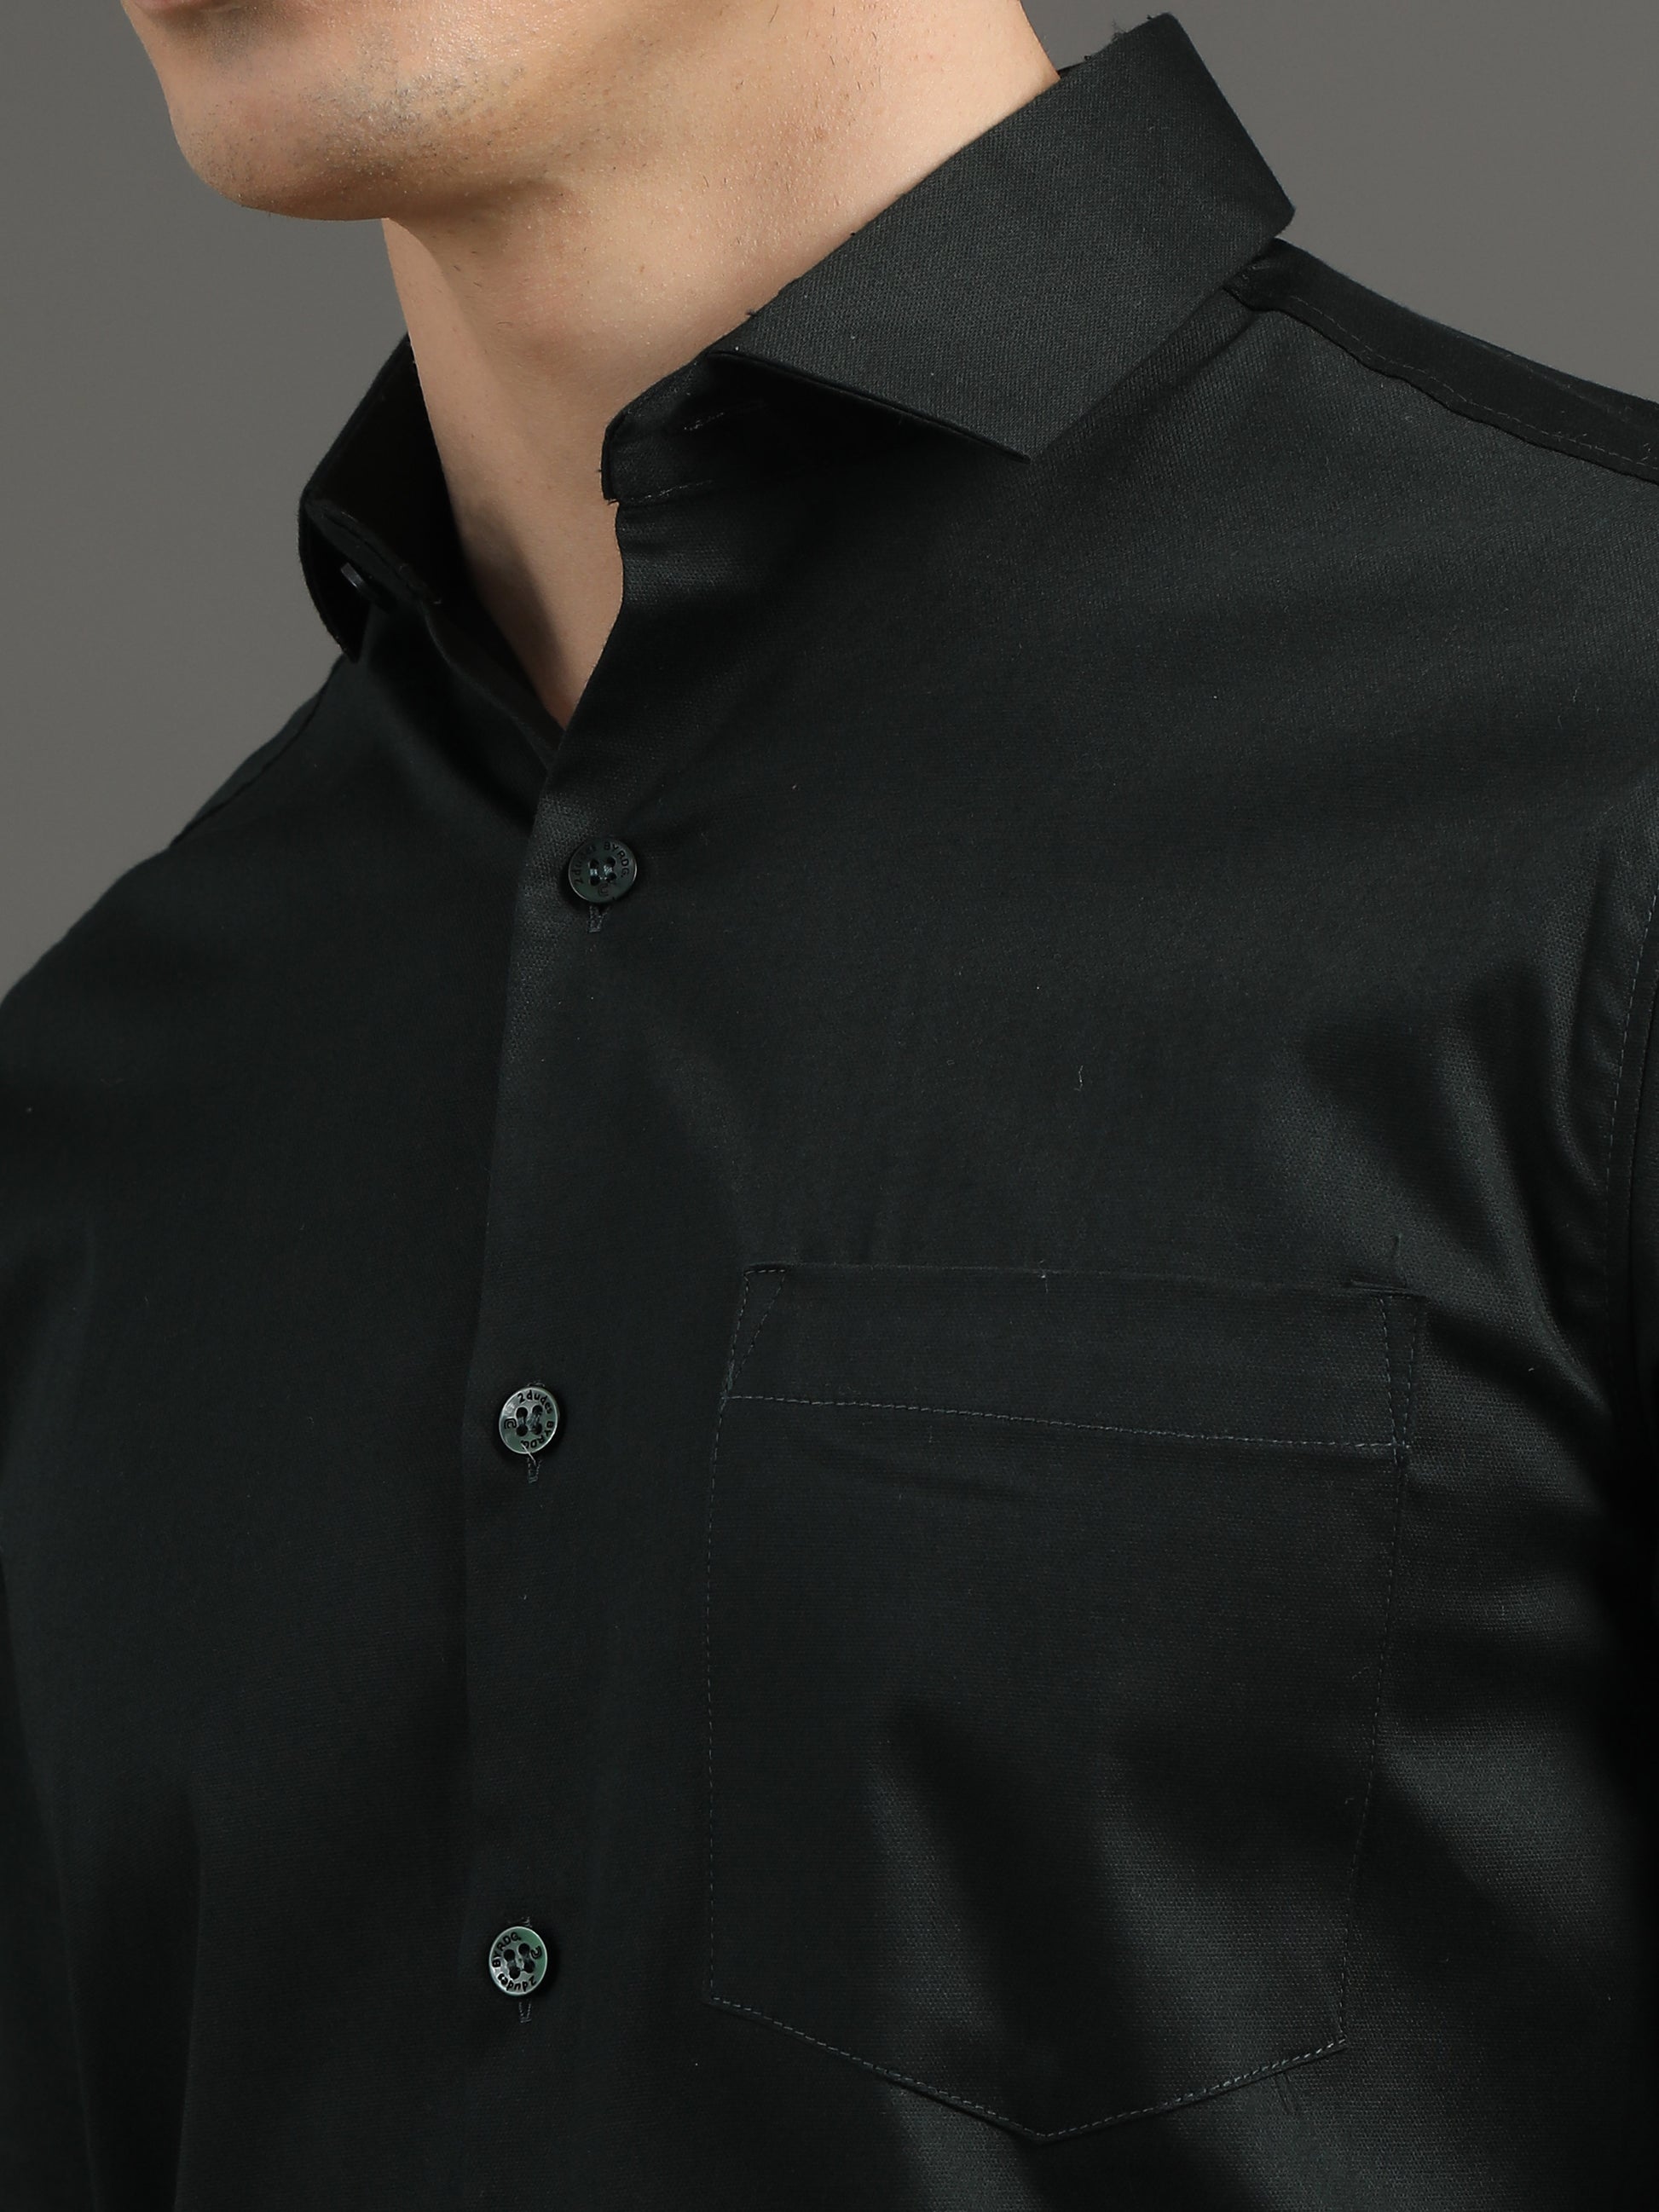 2Dudes Solid Black Full Sleeves Round Neck Cotton Shirt